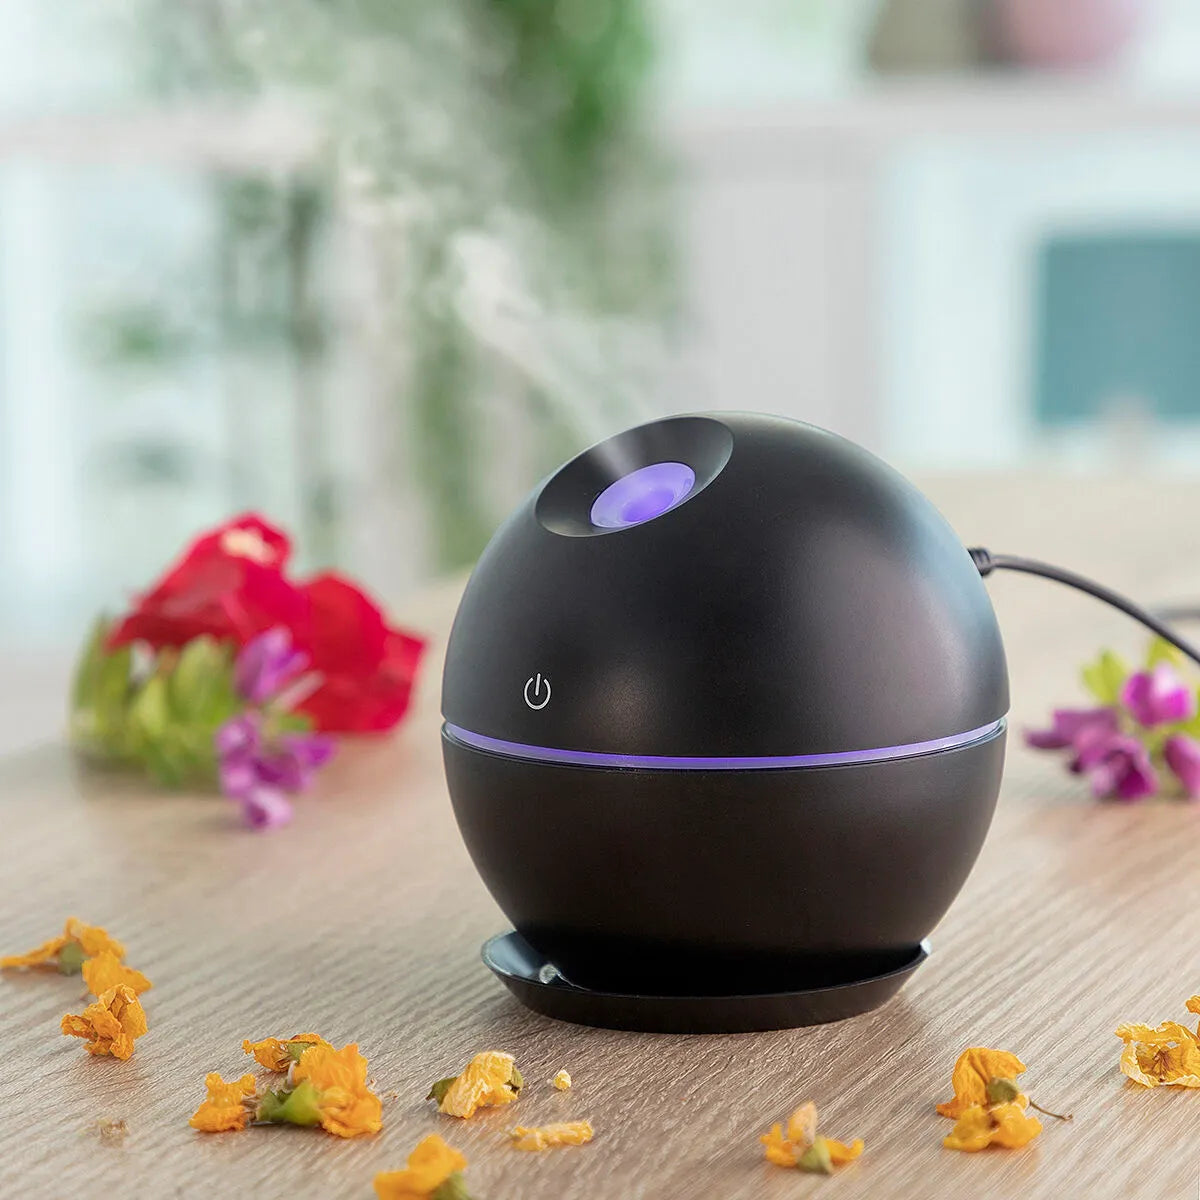 Innovagoods Mini Humidifier Scent Diffuser - Black | 814564 from Innovagoods - DID Electrical